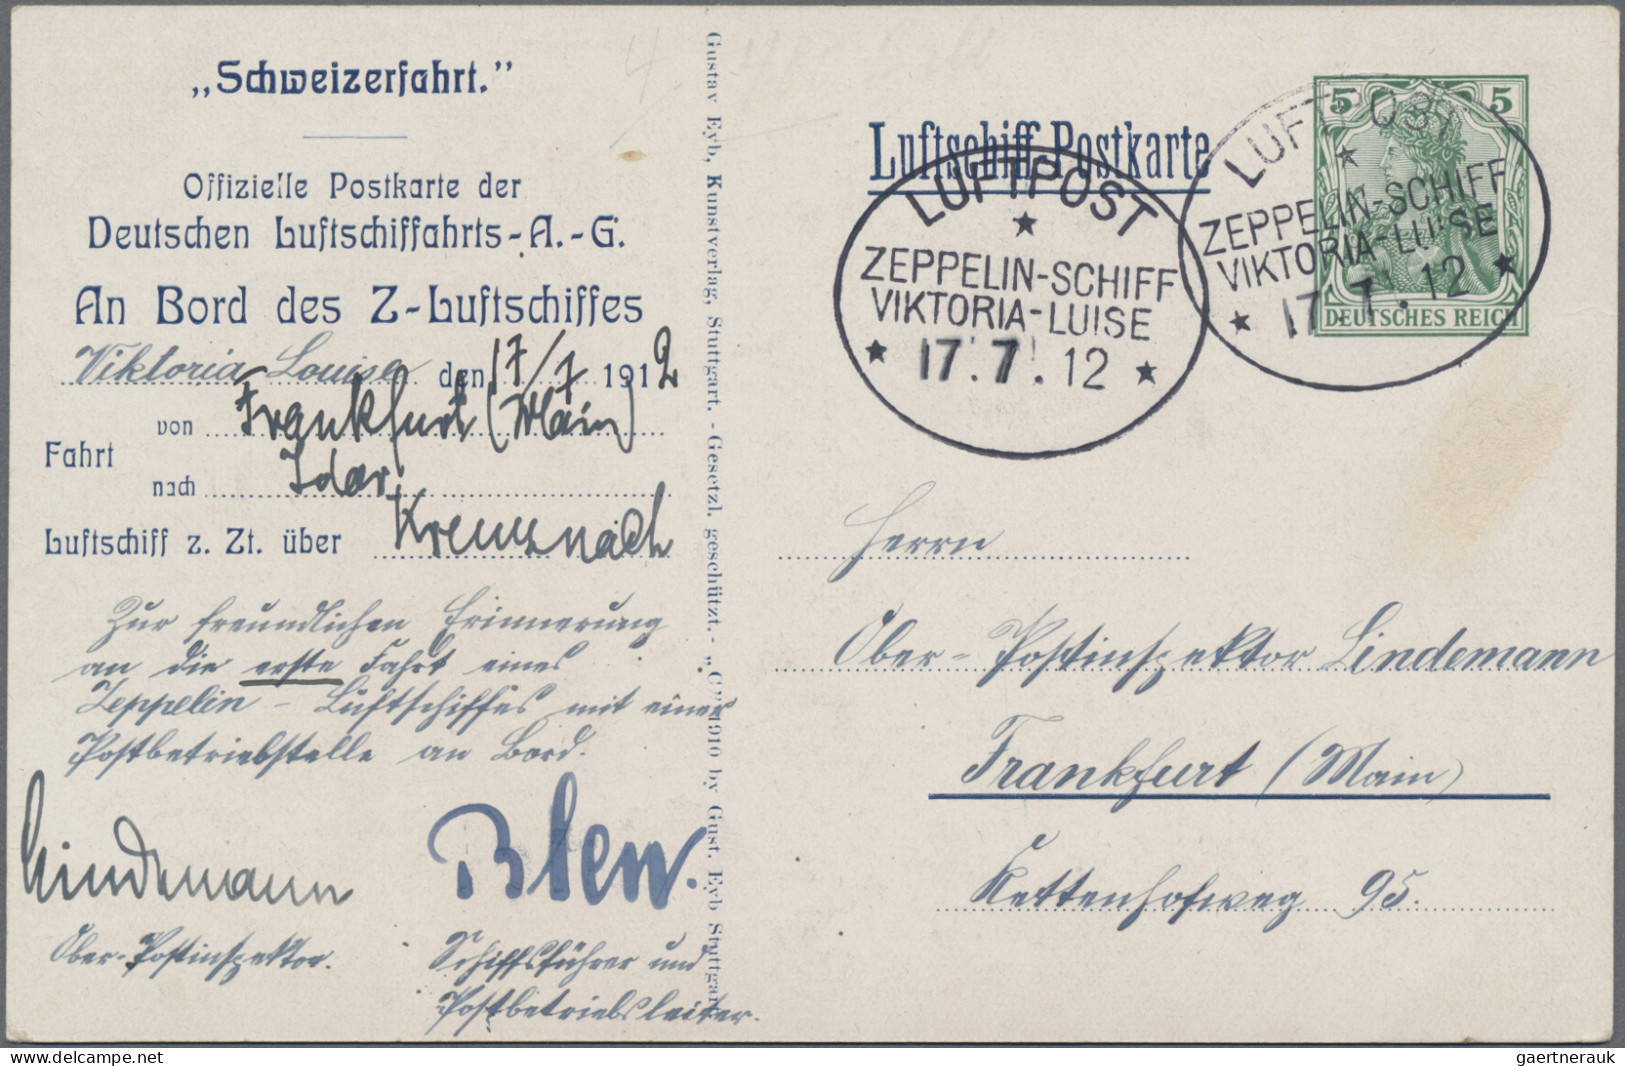 Zeppelin Mail - Germany: 1912 (17. Juli) "Victoria-Luise": Offizielle Bord-Ganzs - Correo Aéreo & Zeppelin